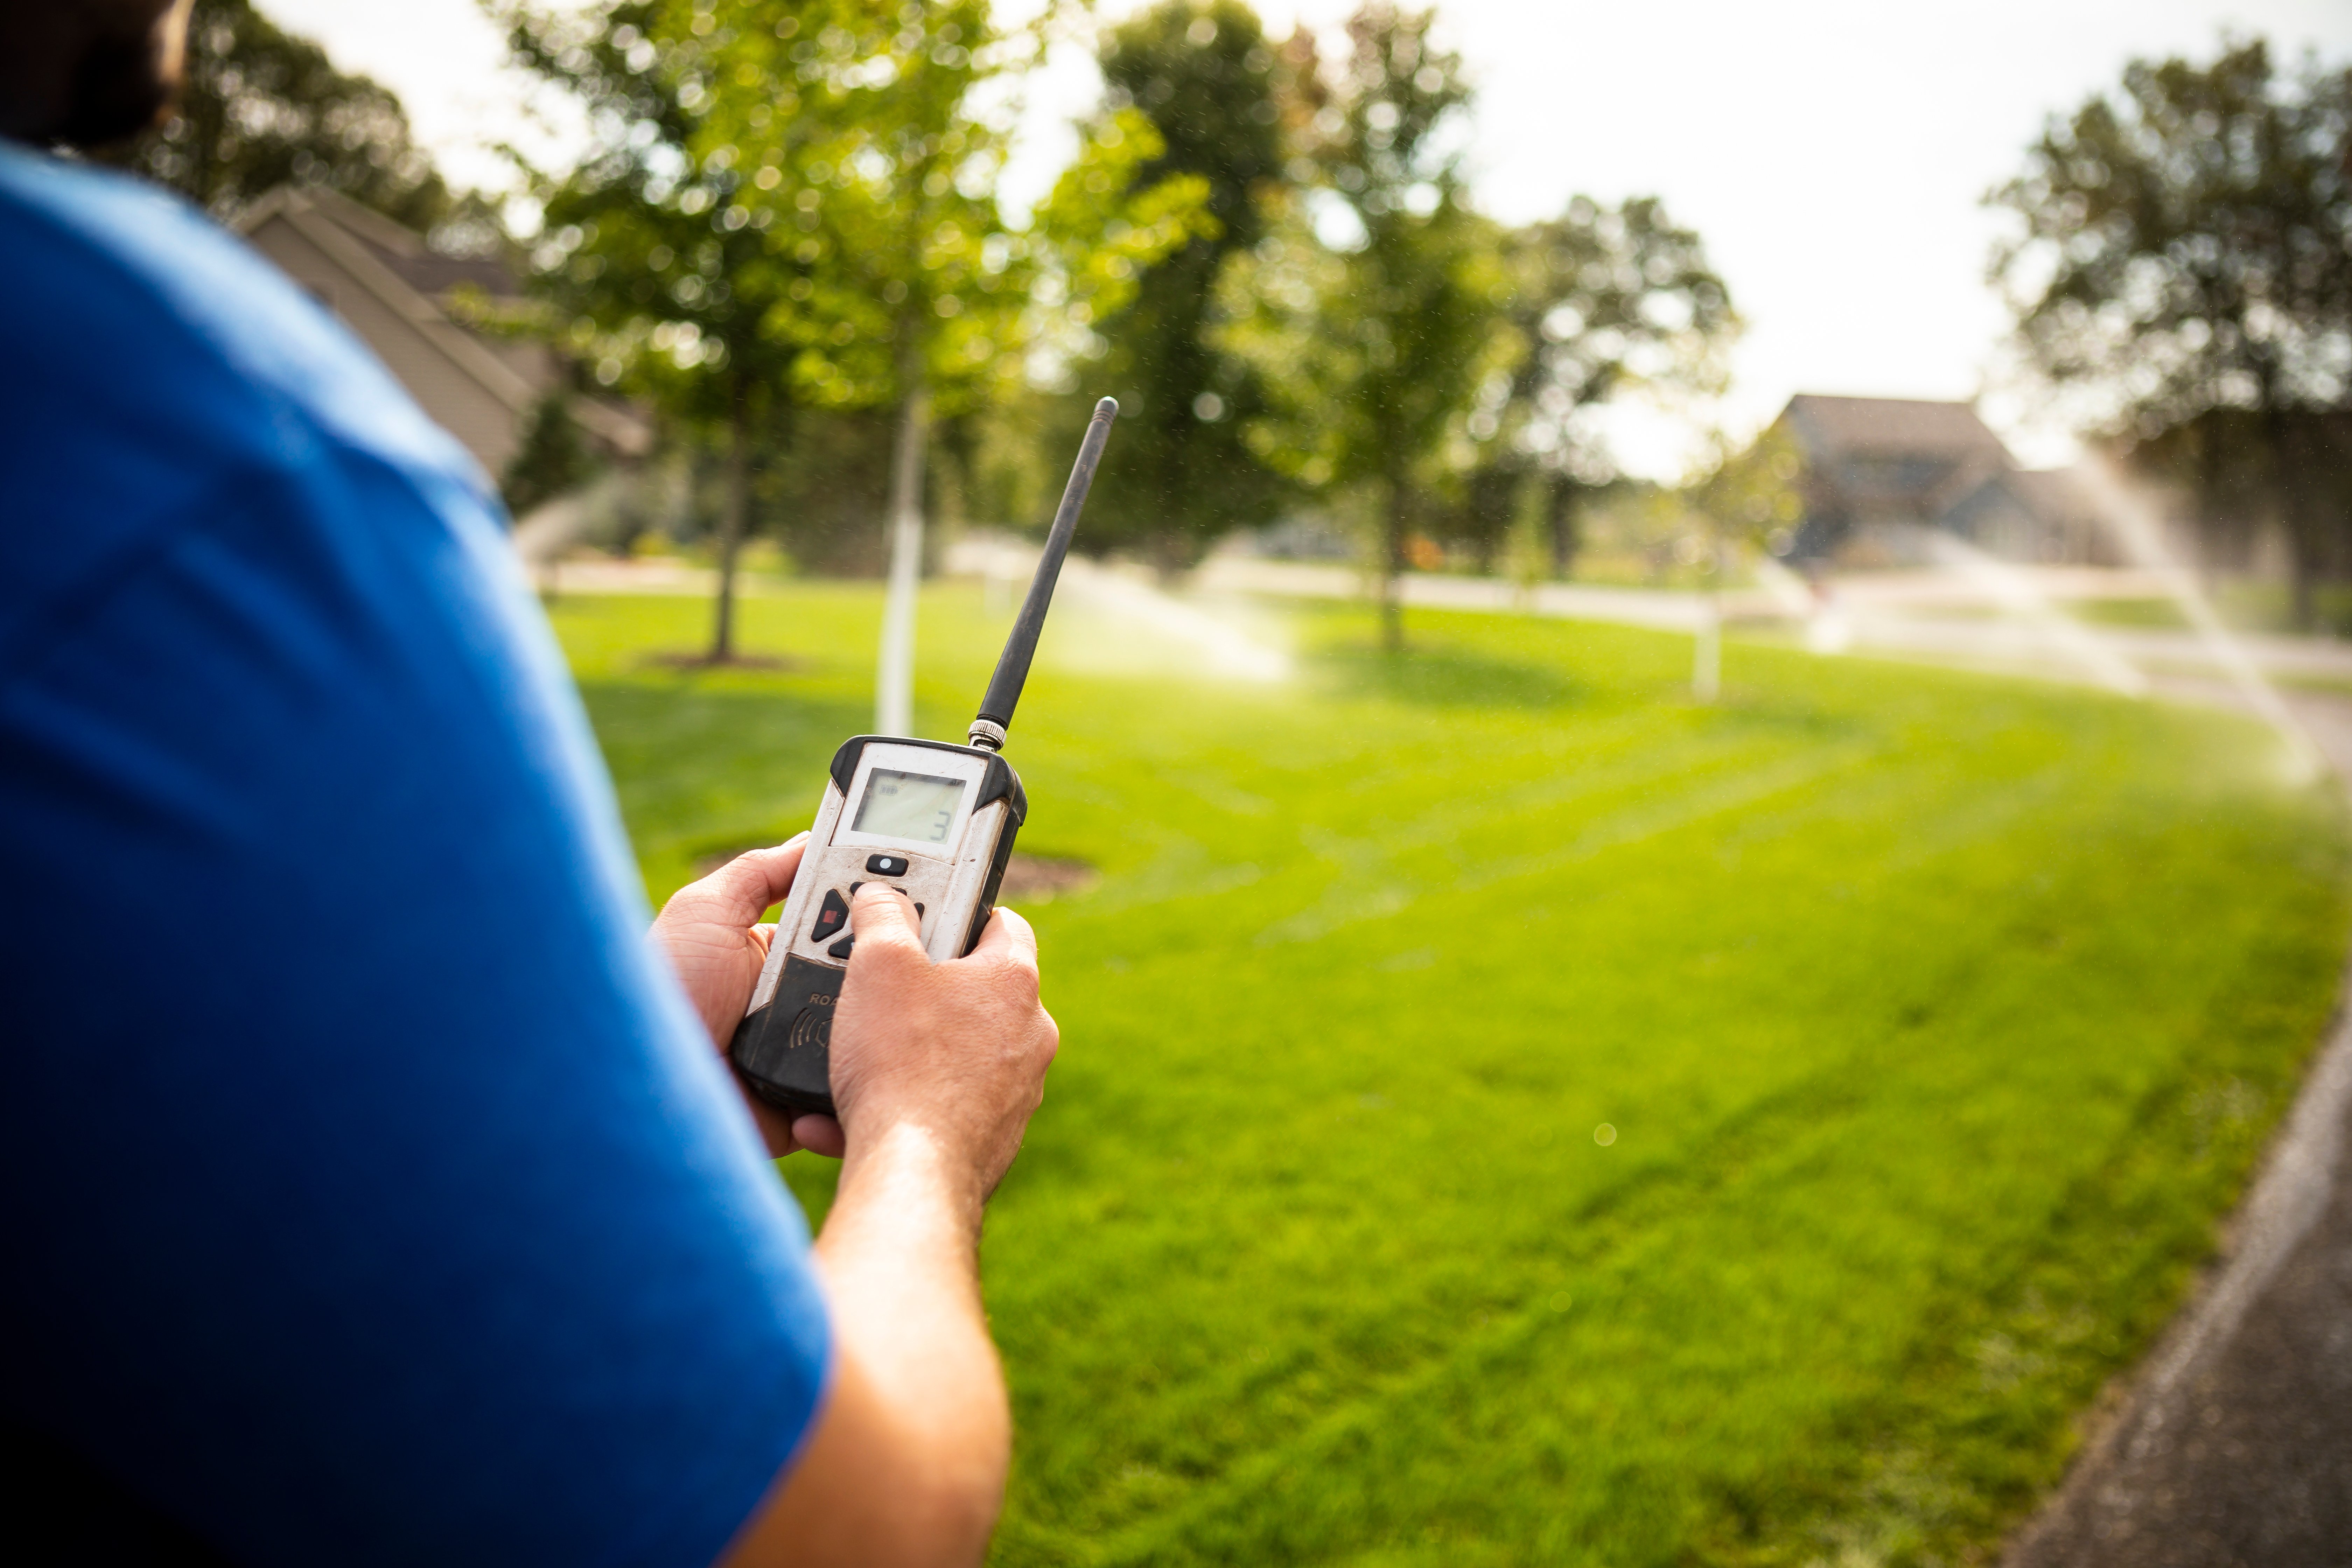 irrigation maintenance technician testing a lawn sprinkler system with a remote control